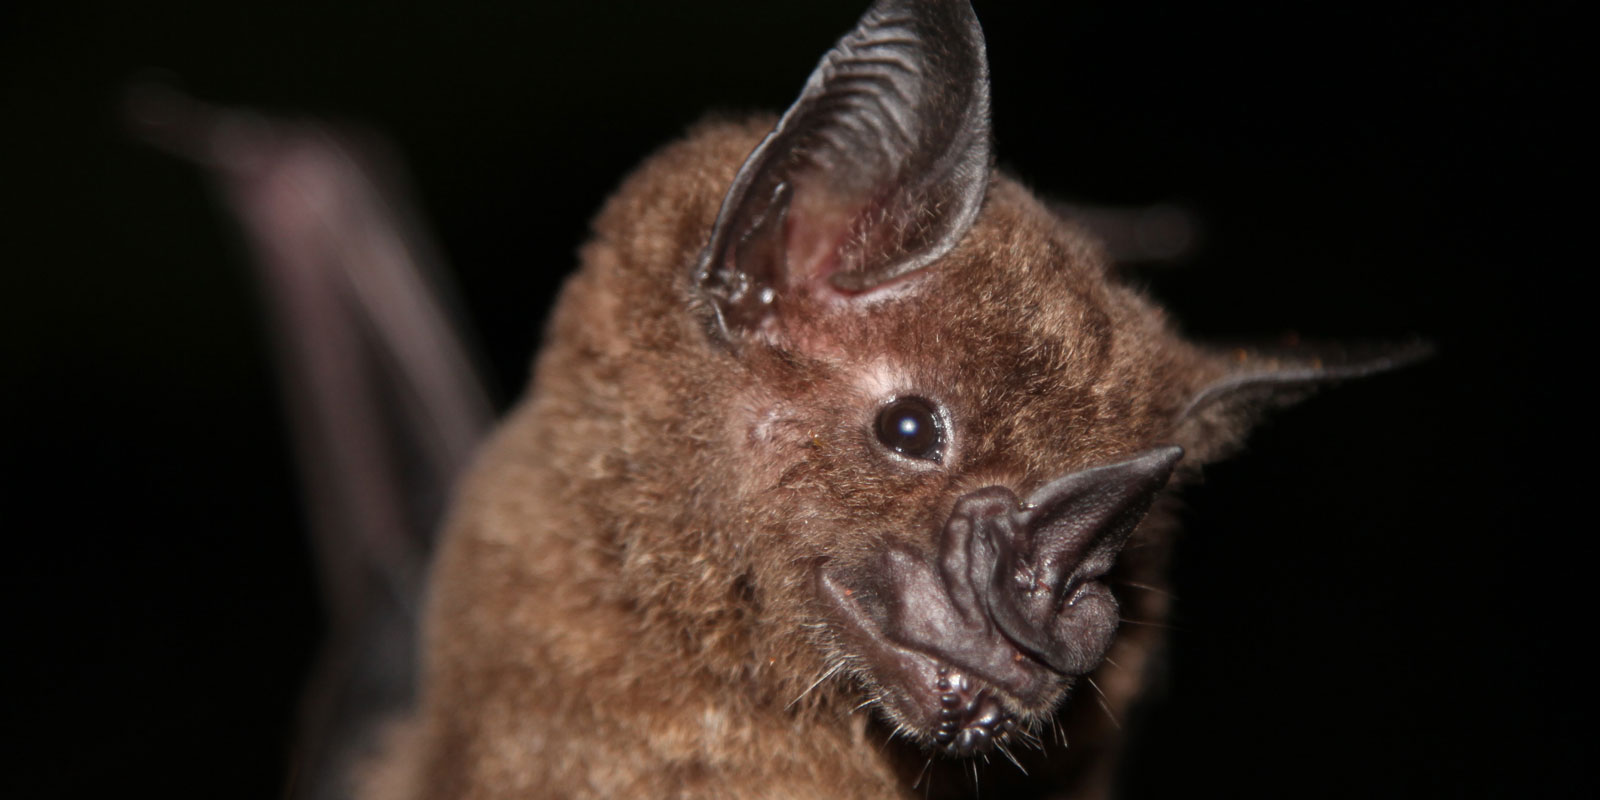 A close up view of the greater spear-nosed bat